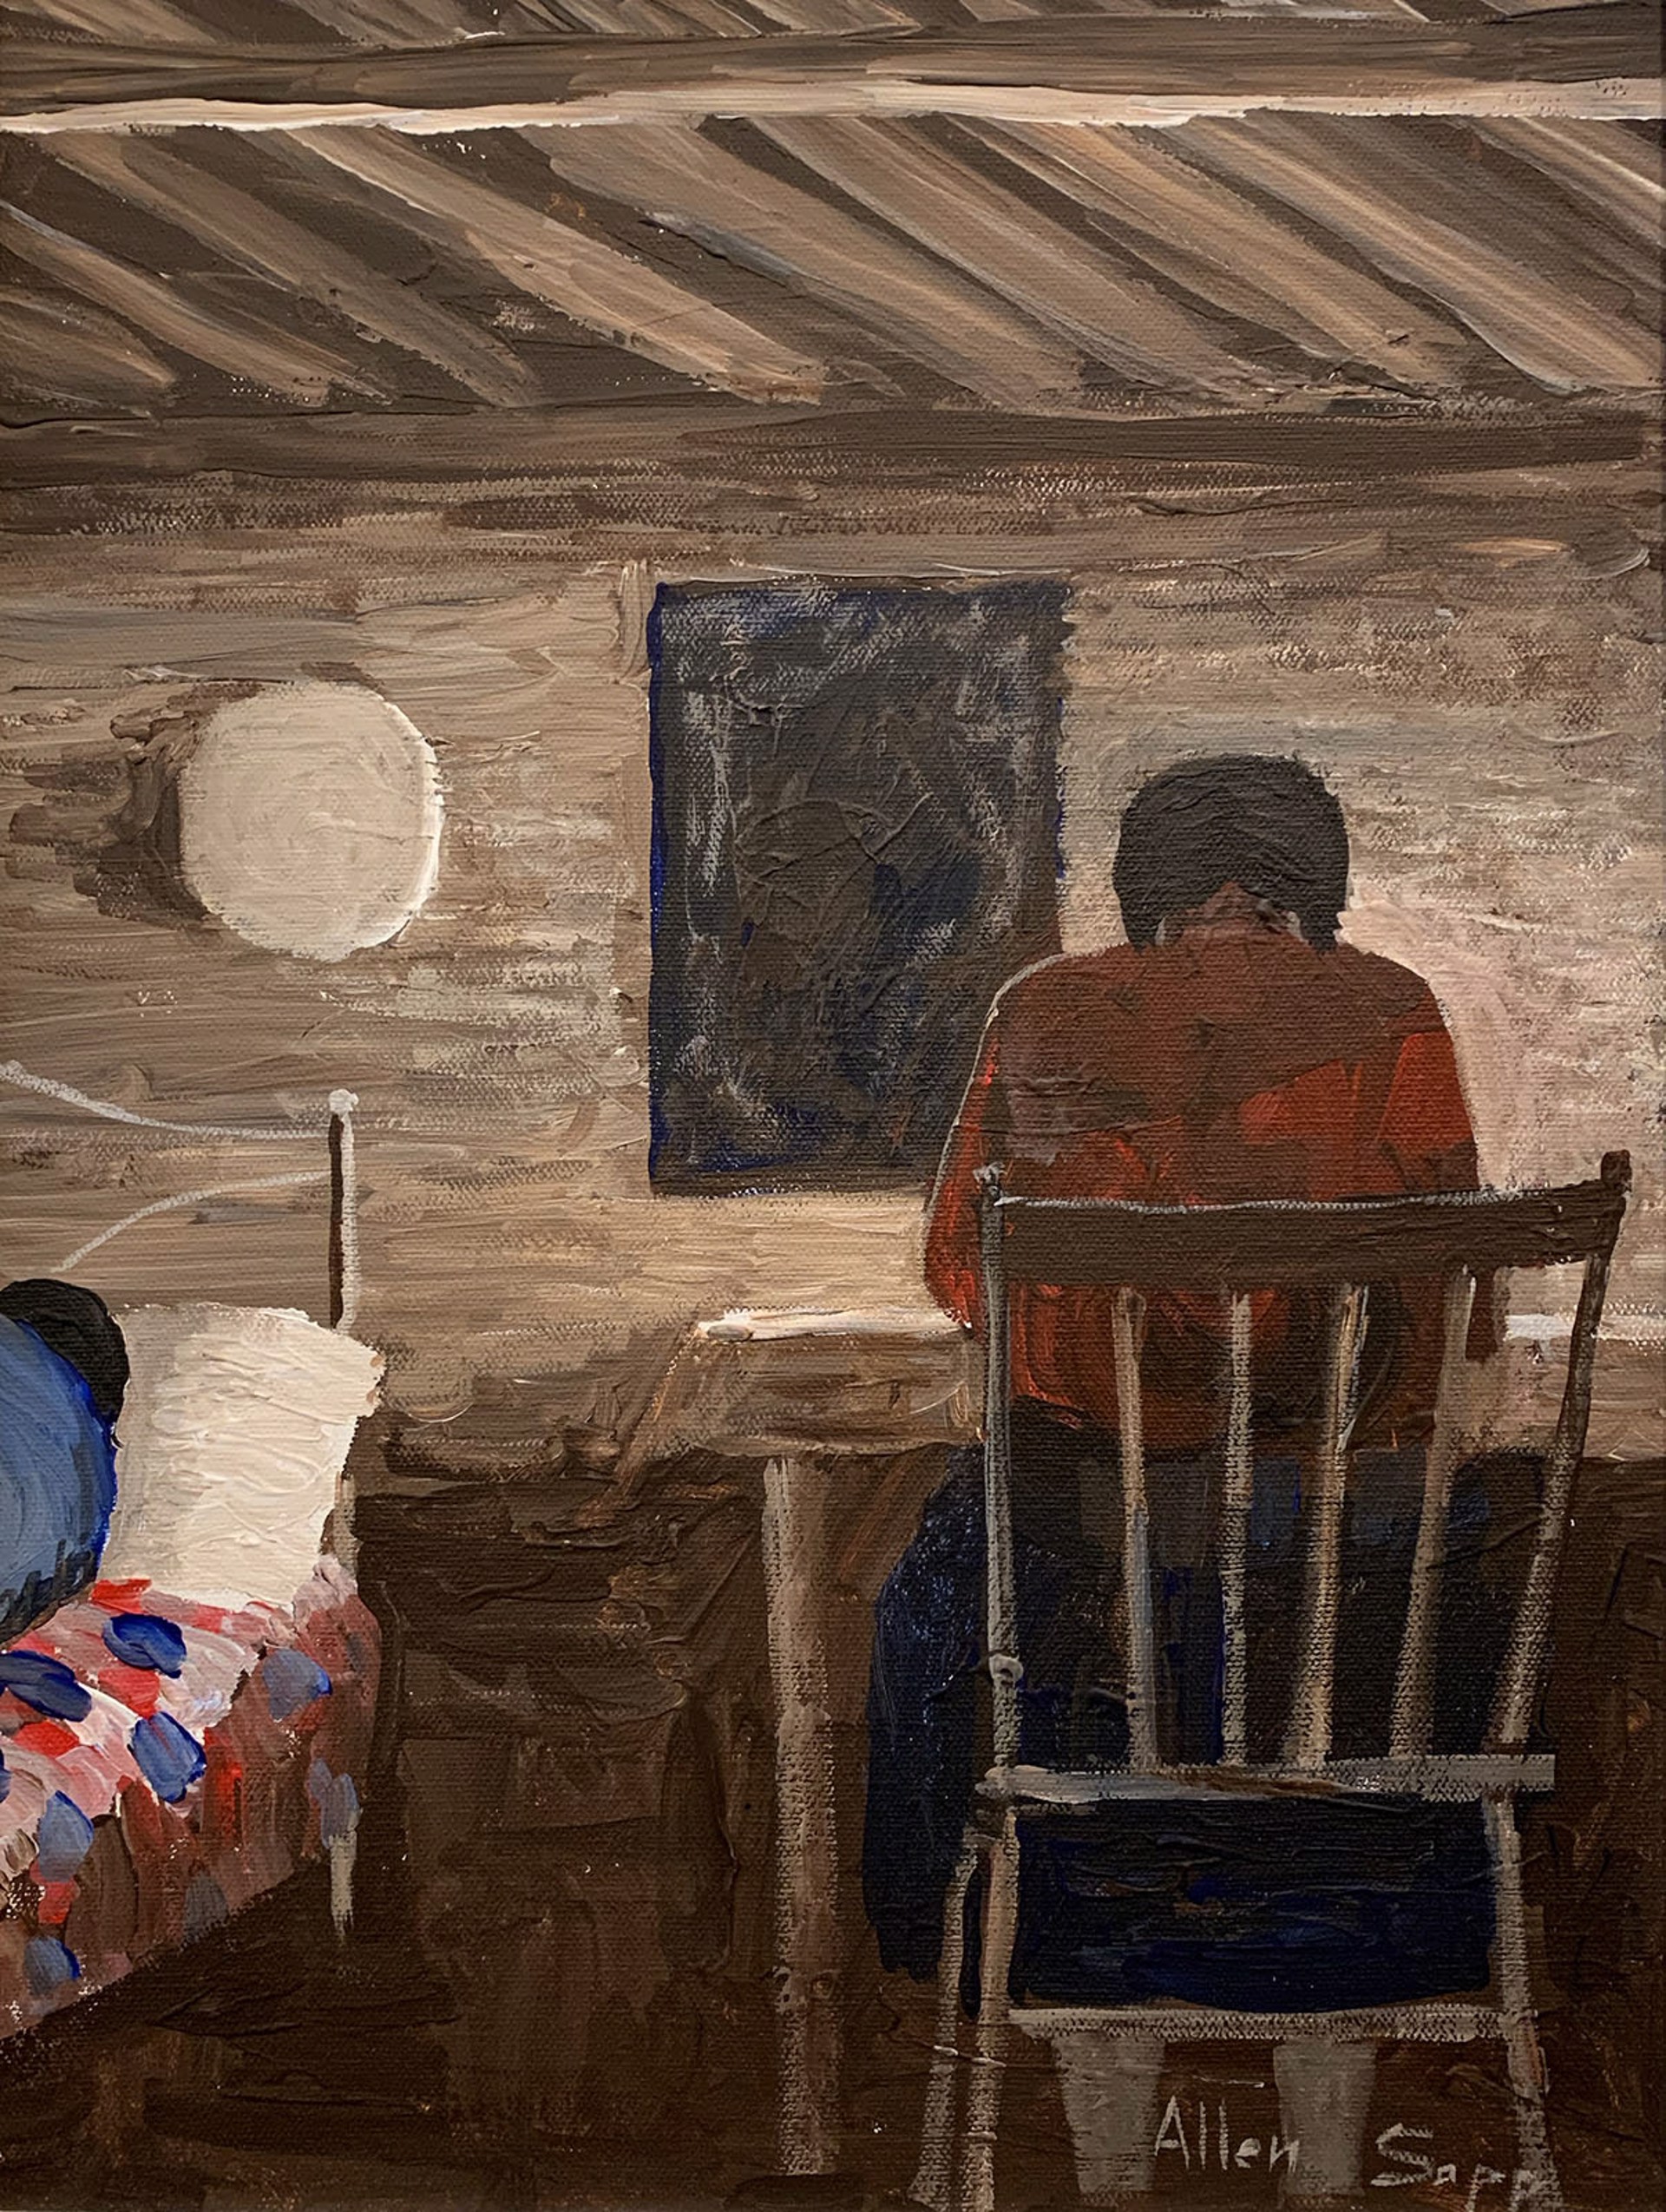 Time to Rest a Long Day by Allen Sapp (1928-2015)